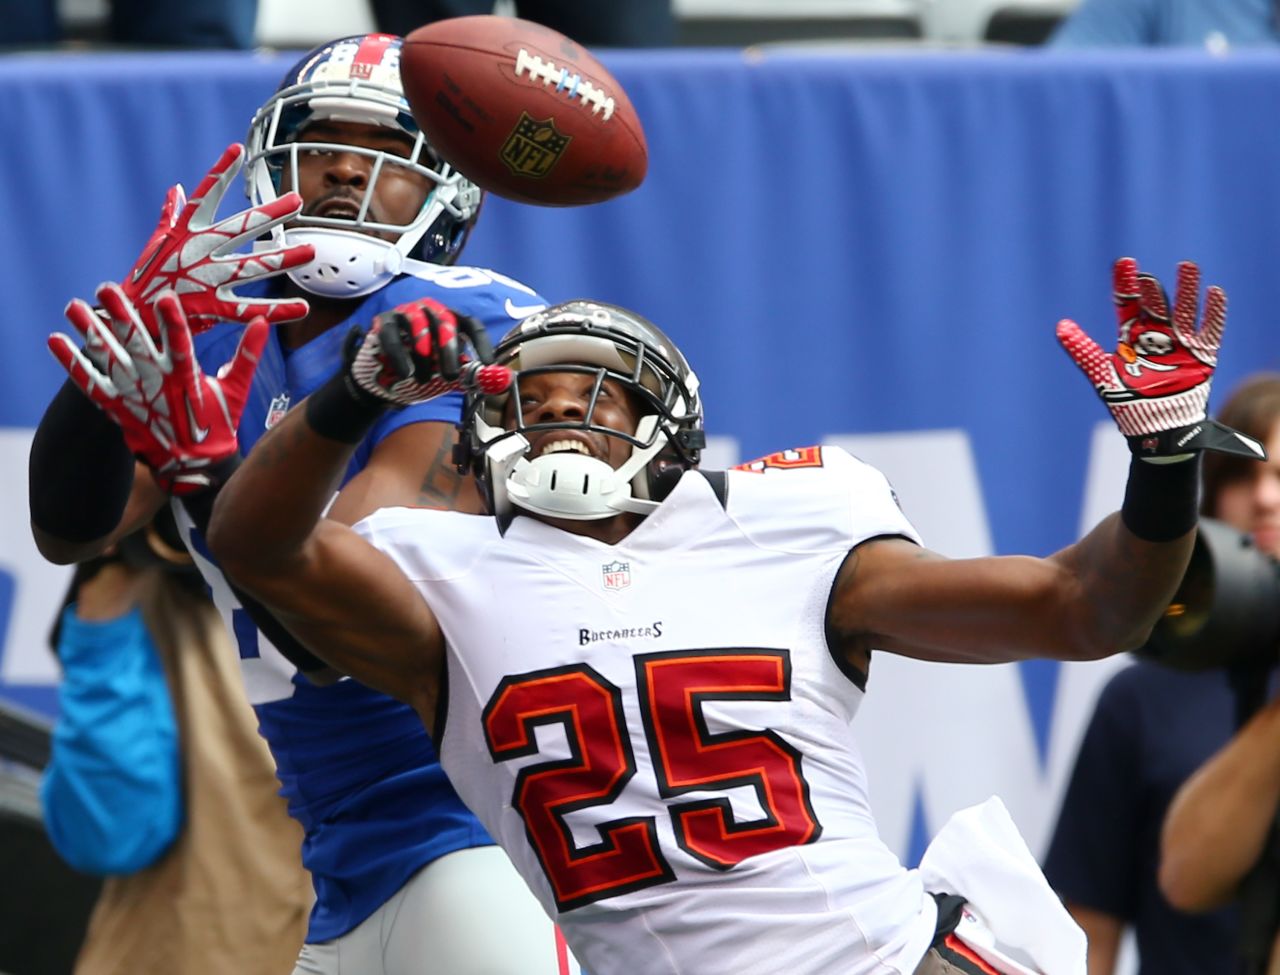 Aqib Talib of the Tampa Bay Buccaneers breaks up a pass intended for Hakeem Nicks of the New York Giants in the first half on Sunday.